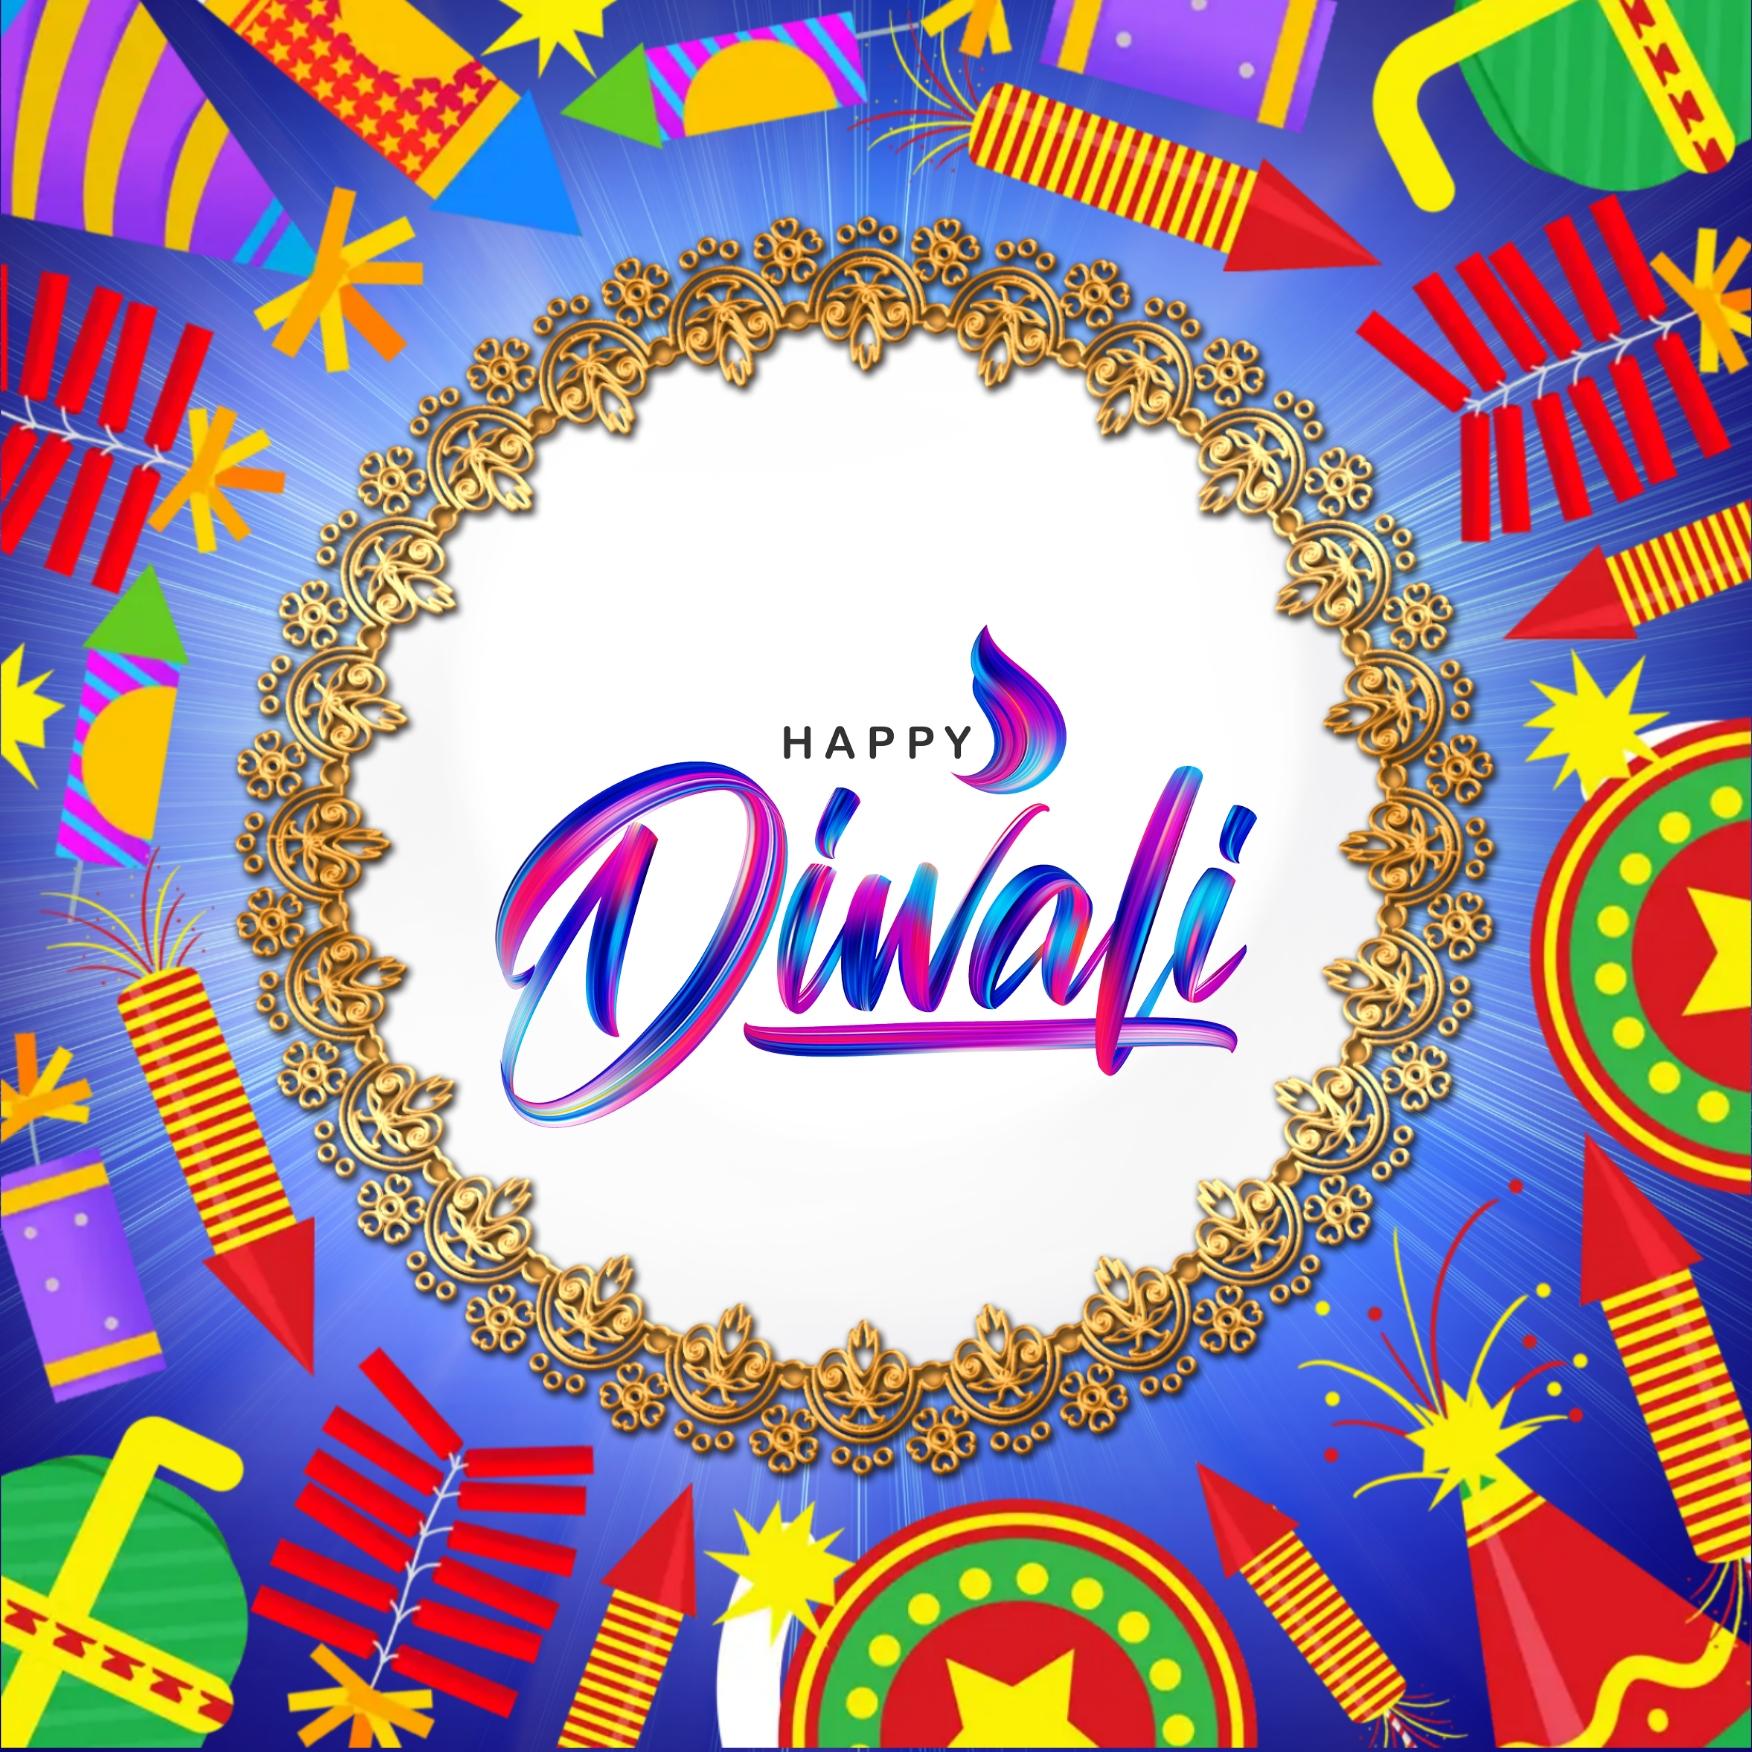 Happy Diwali Images for Whatsapp DP